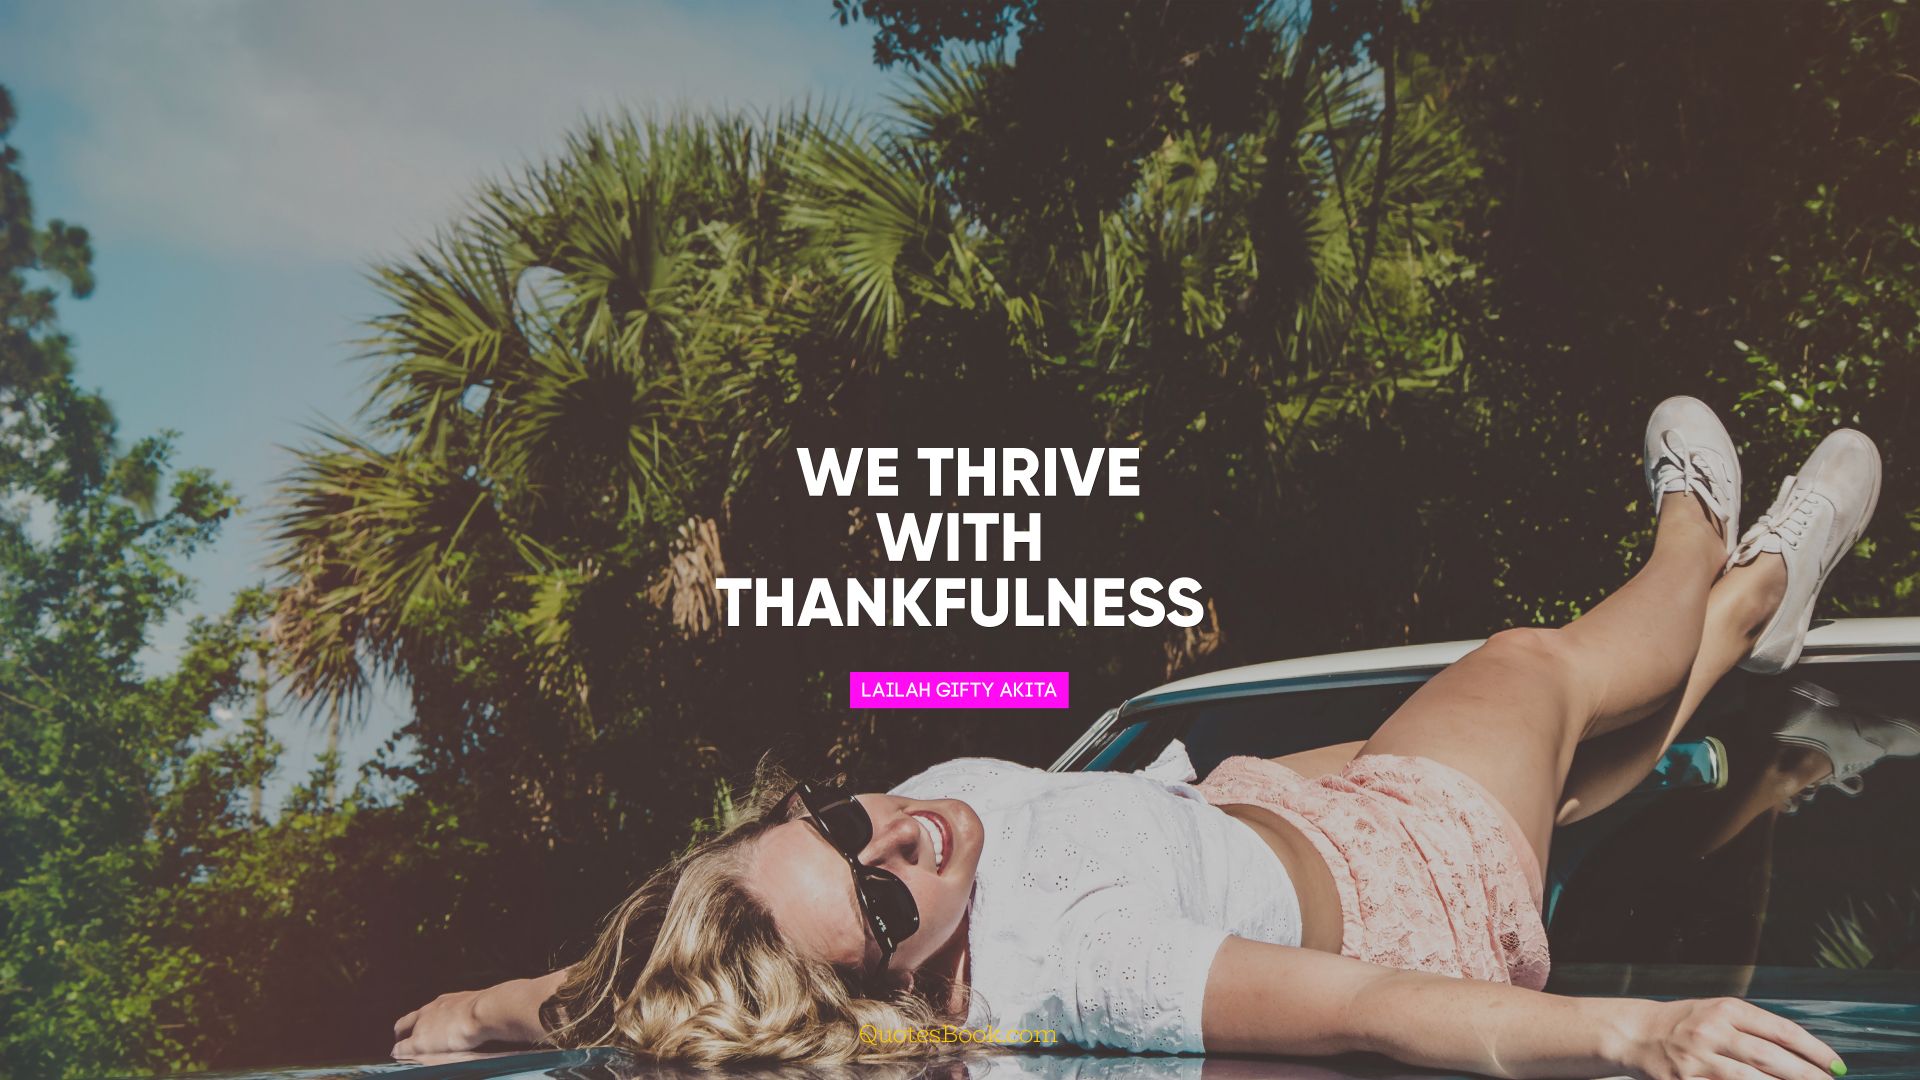 We thrive with thankfulness. - Quote by Lailah Gifty Akita